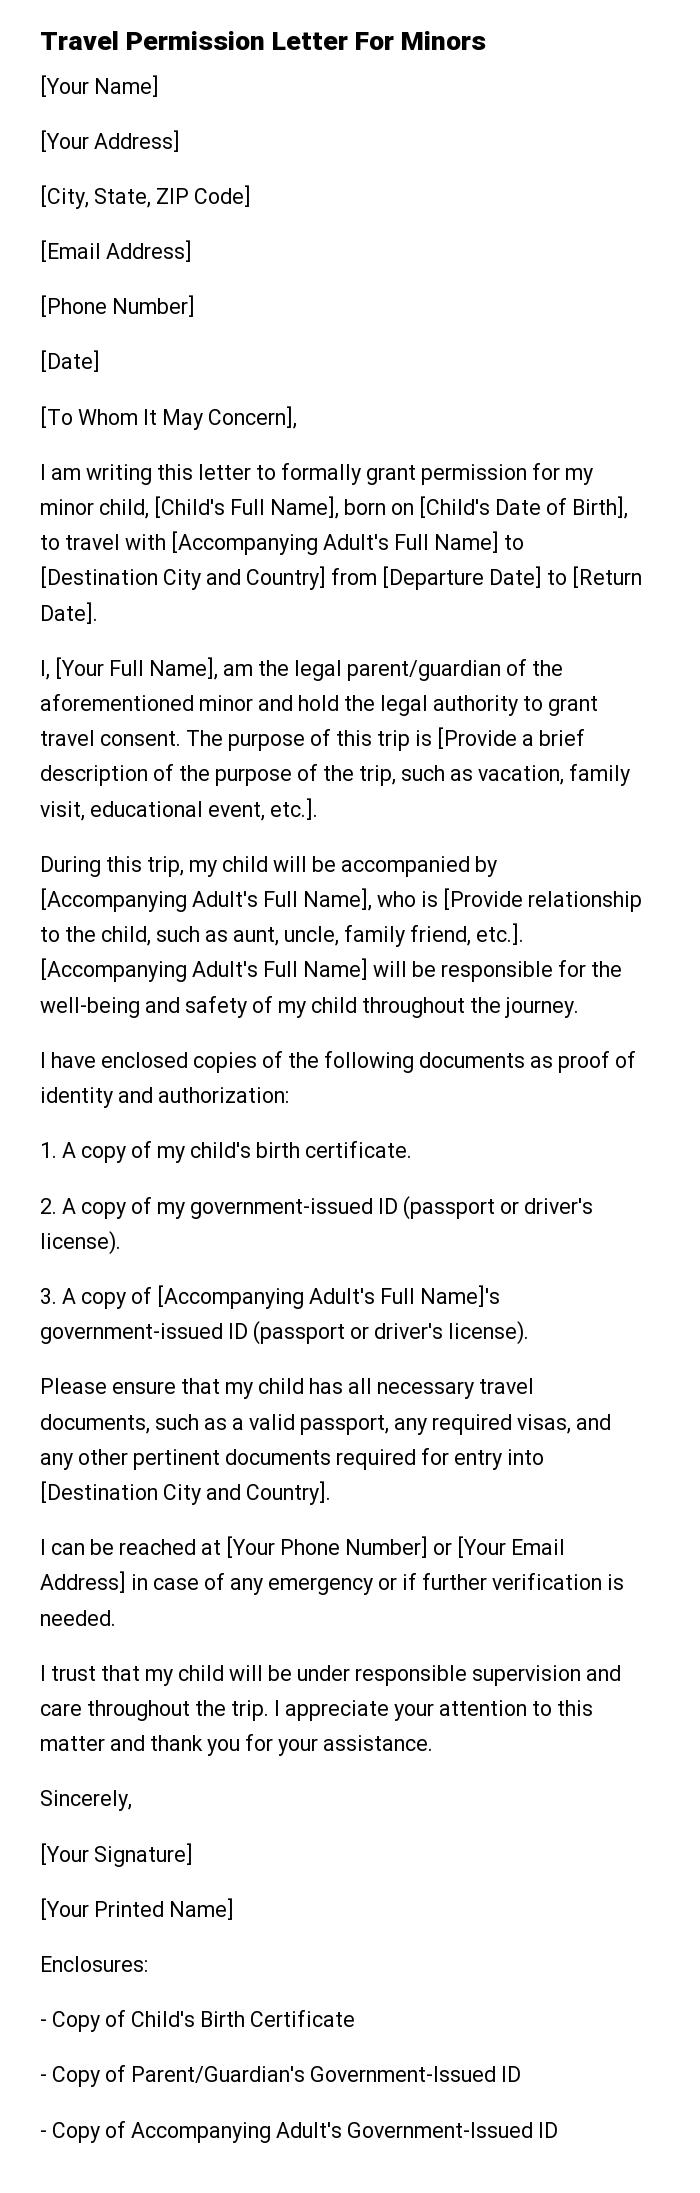 Travel Permission Letter For Minors